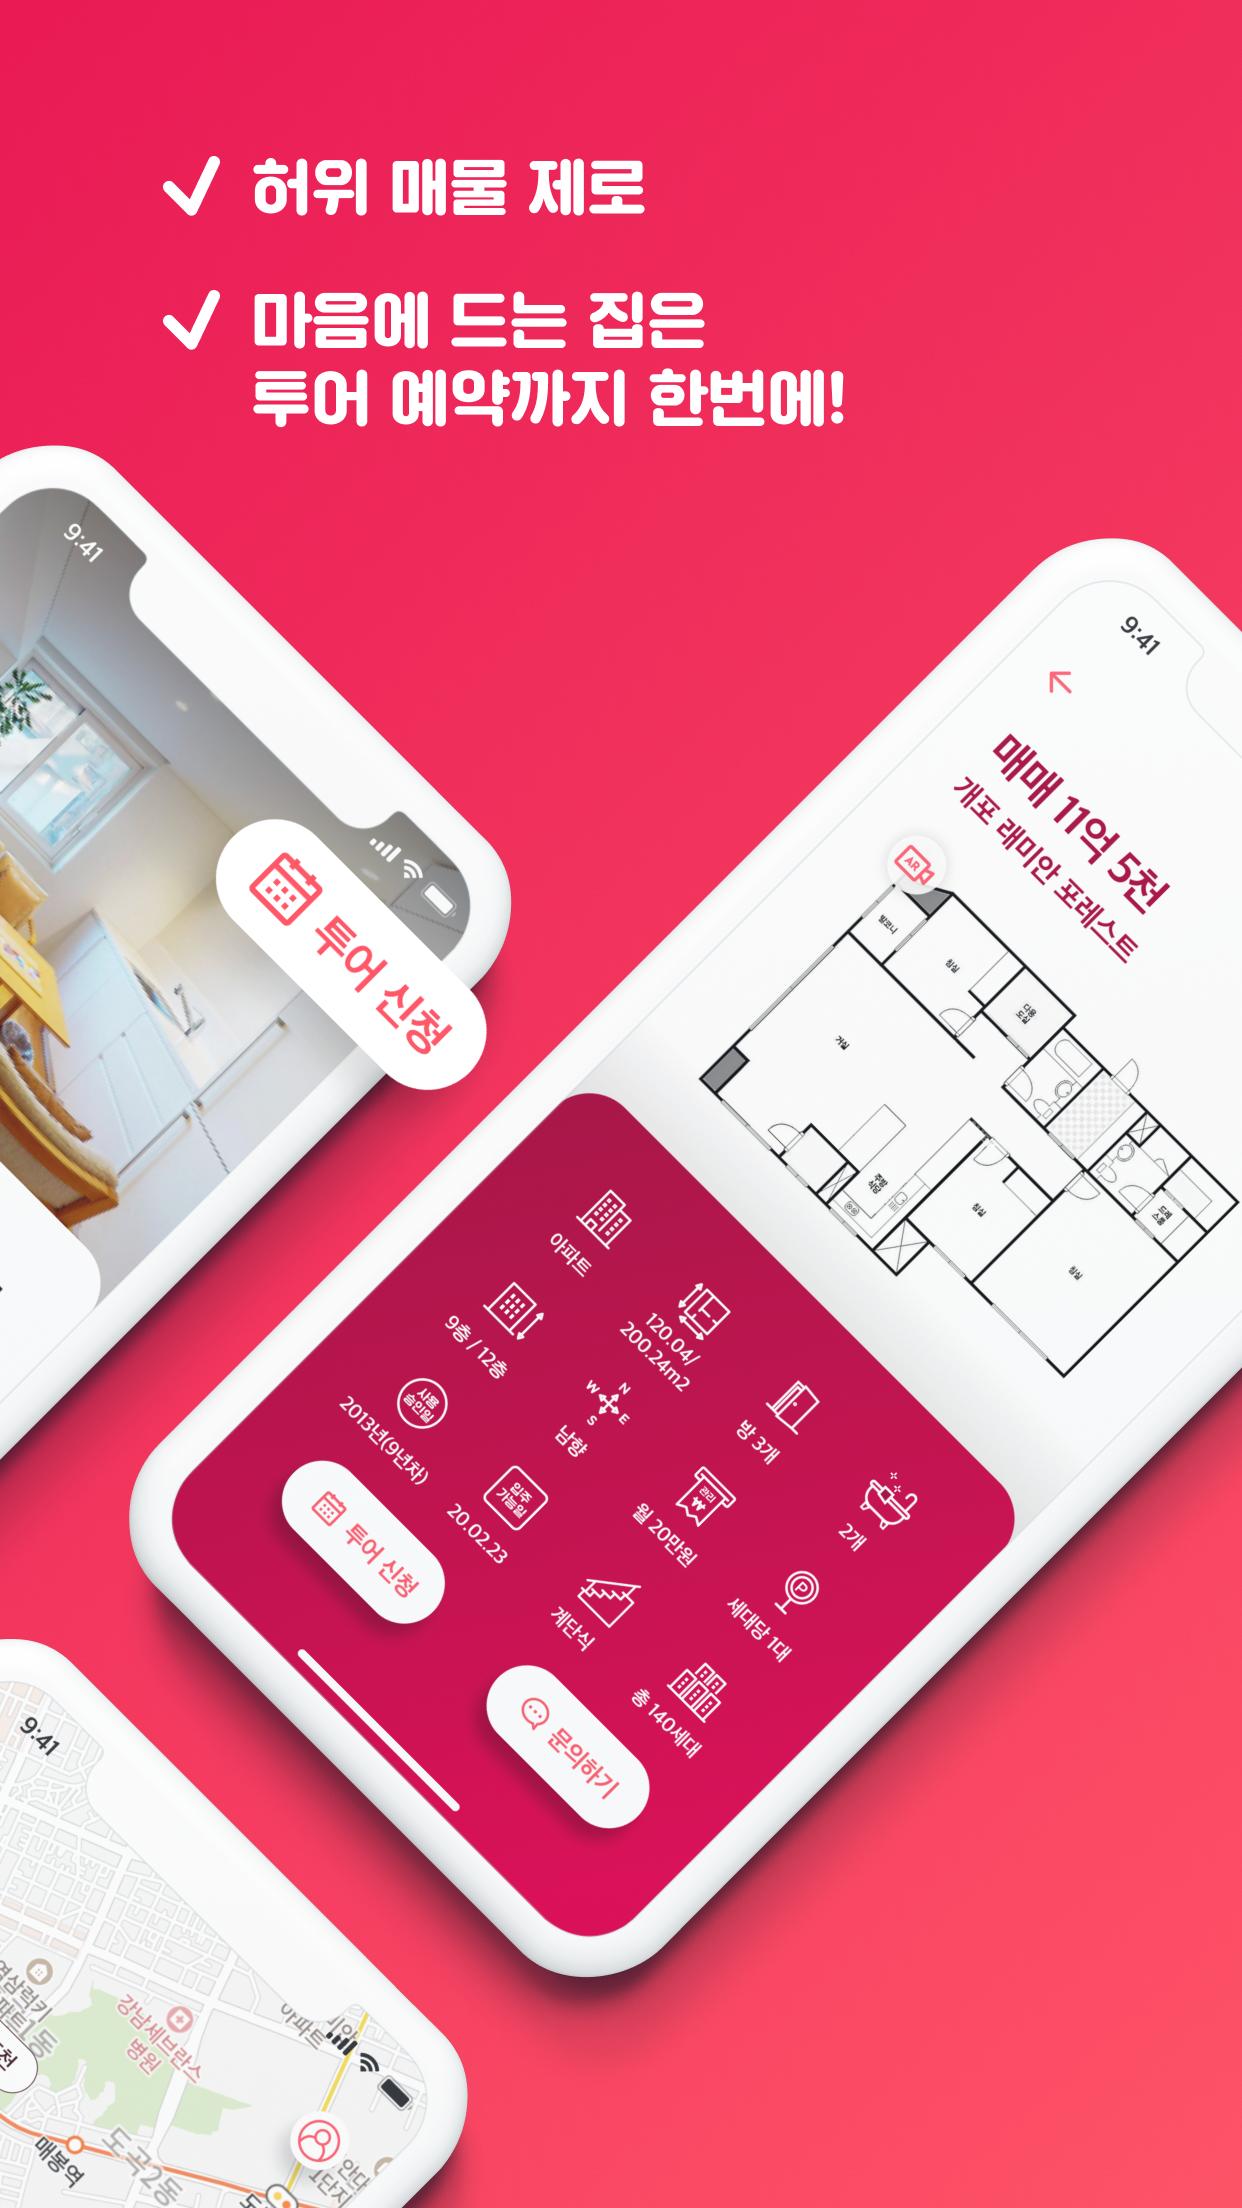 Dongnae Real Estate: Find Your Home 1.0.2 Screenshot 7